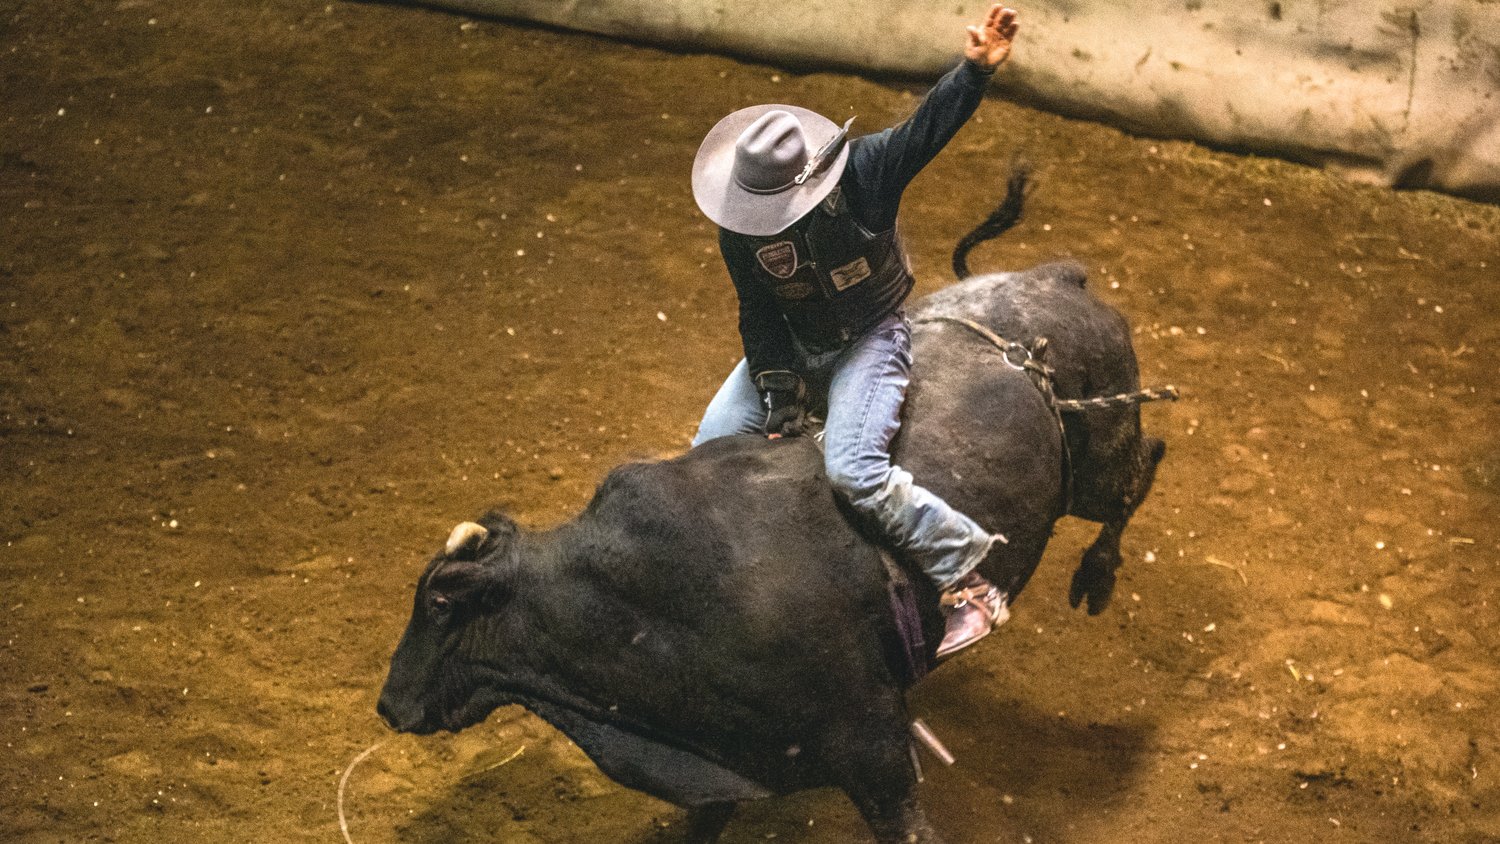 Marc Dorendorf sports a cowboy hat tries to hang onto a bull at a Lazy HK Bar Rodeo Winter Series event Saturday in Silver Creek.